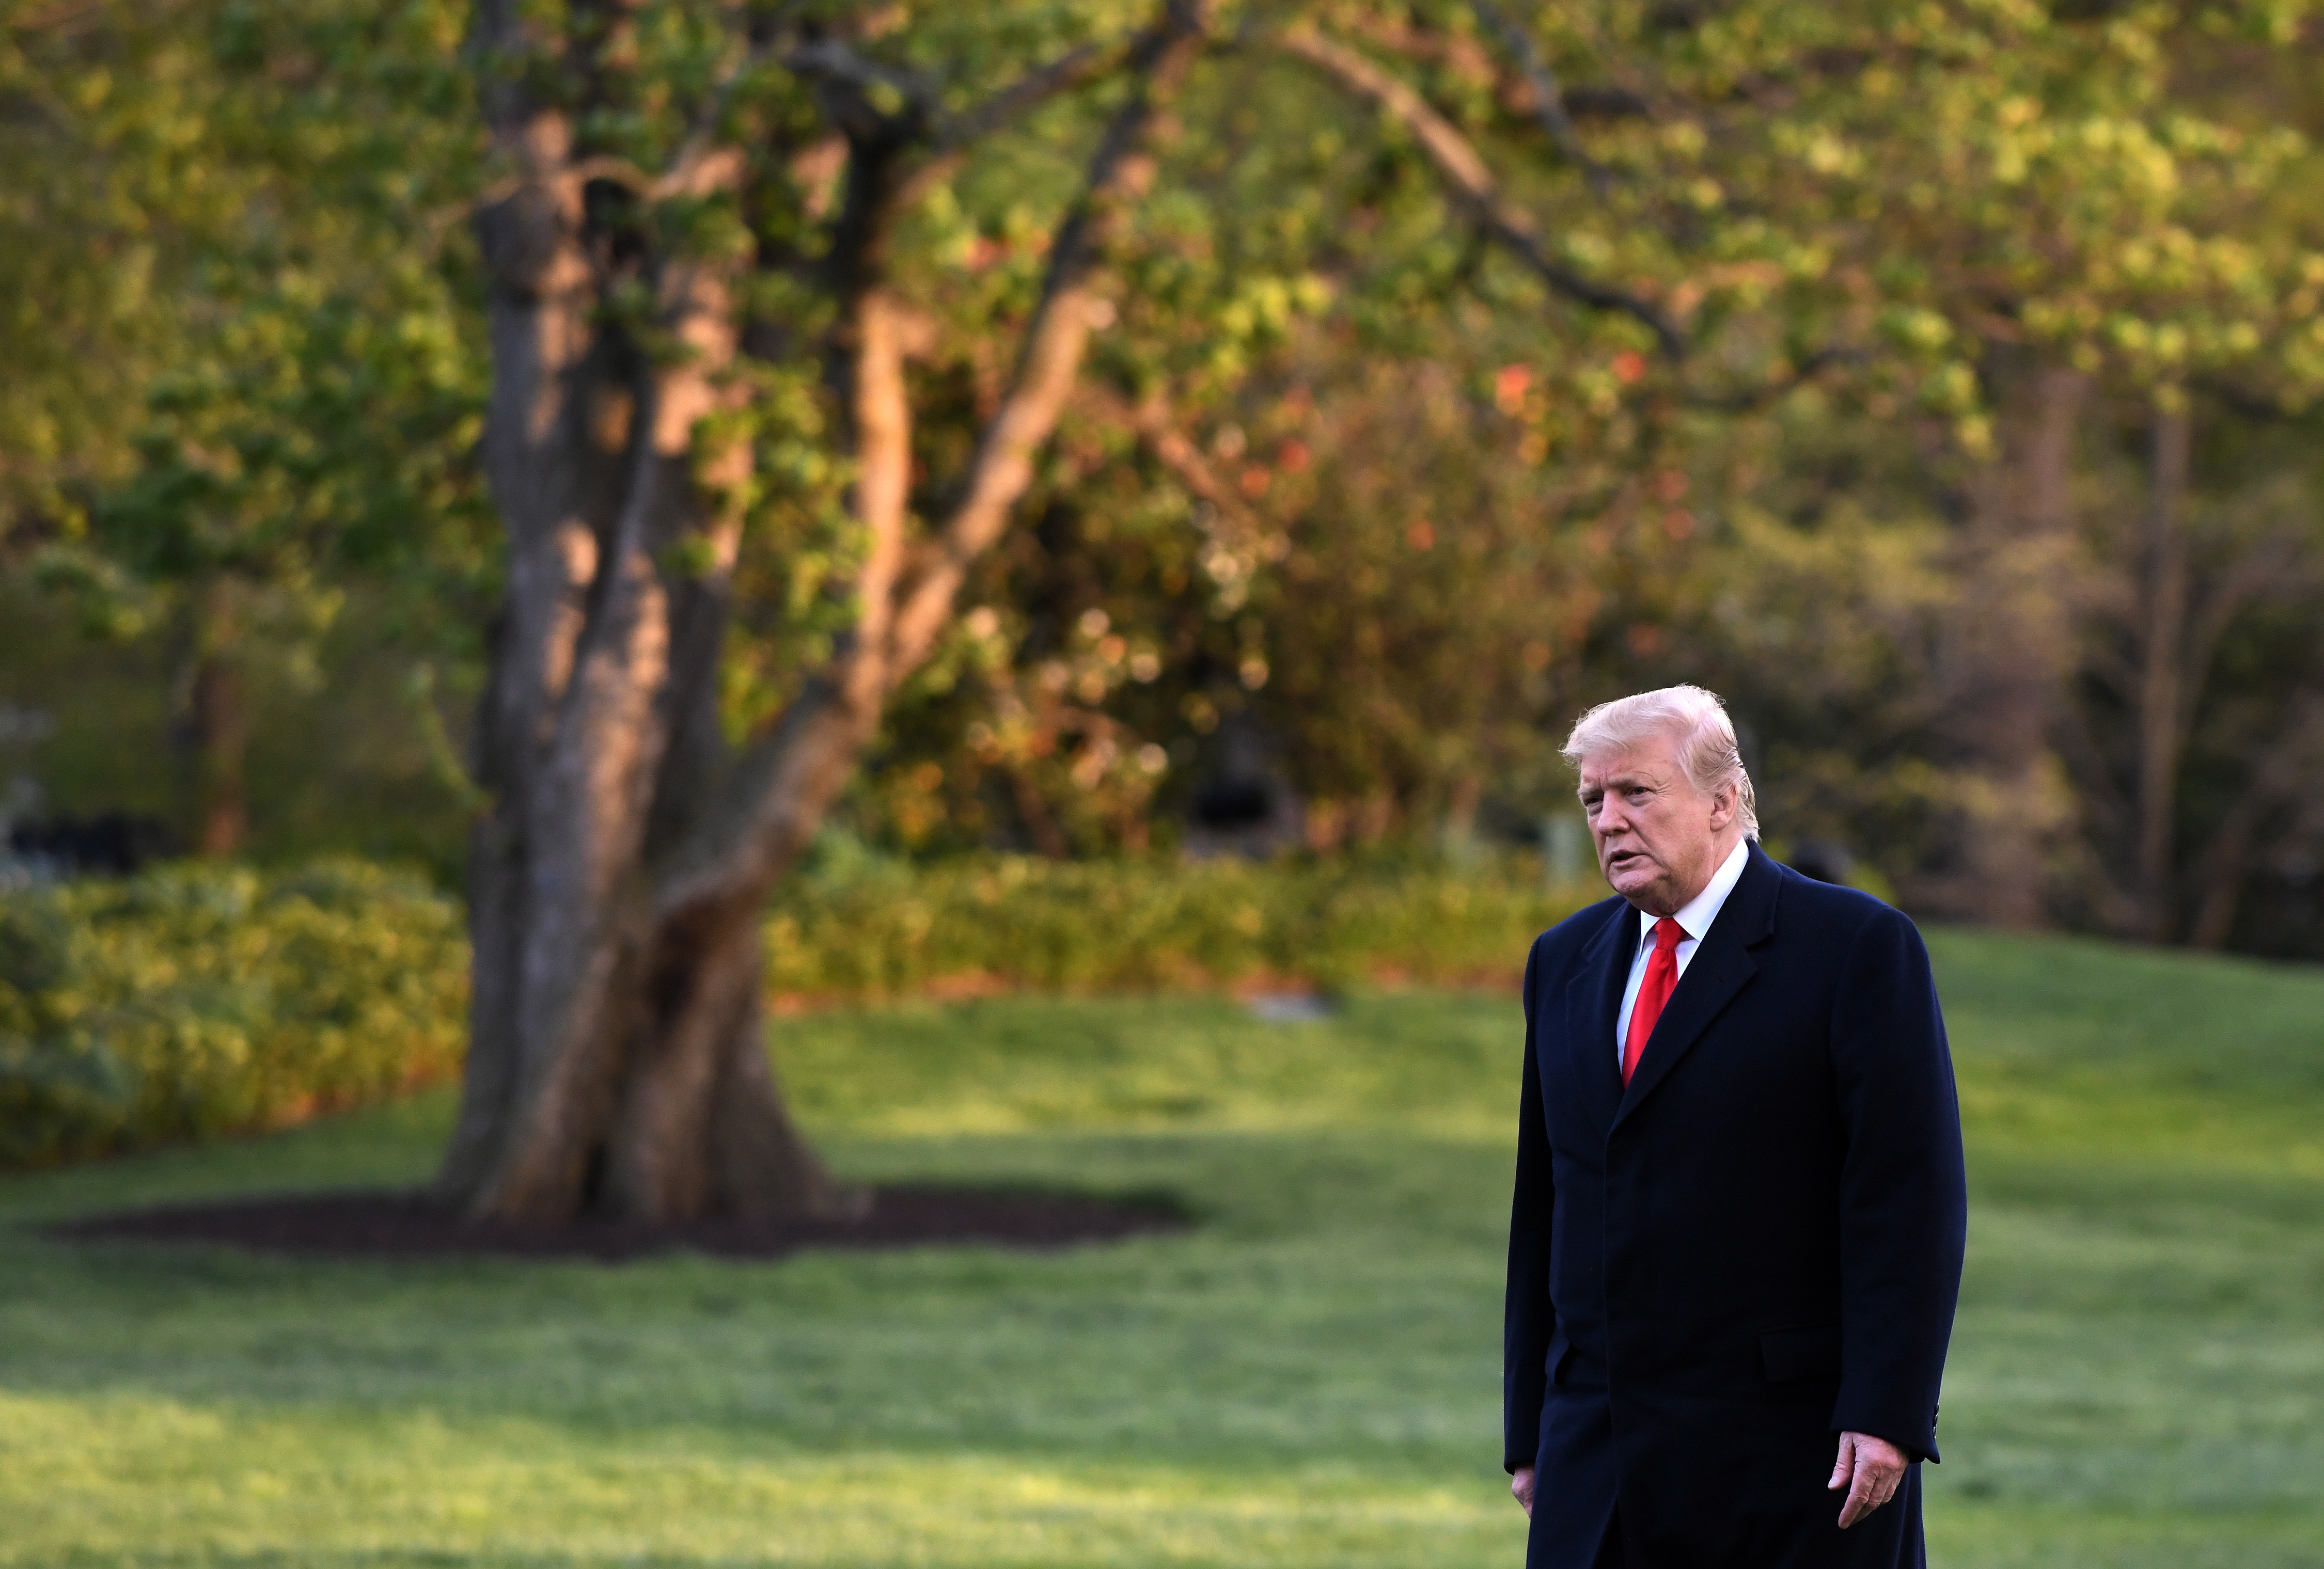 epa07509168 US President Donald J. Trump arrives back at the White House in Washington, DC, USA, 15 April 2019.  EPA/OLIVIER DOULIERY / POOL